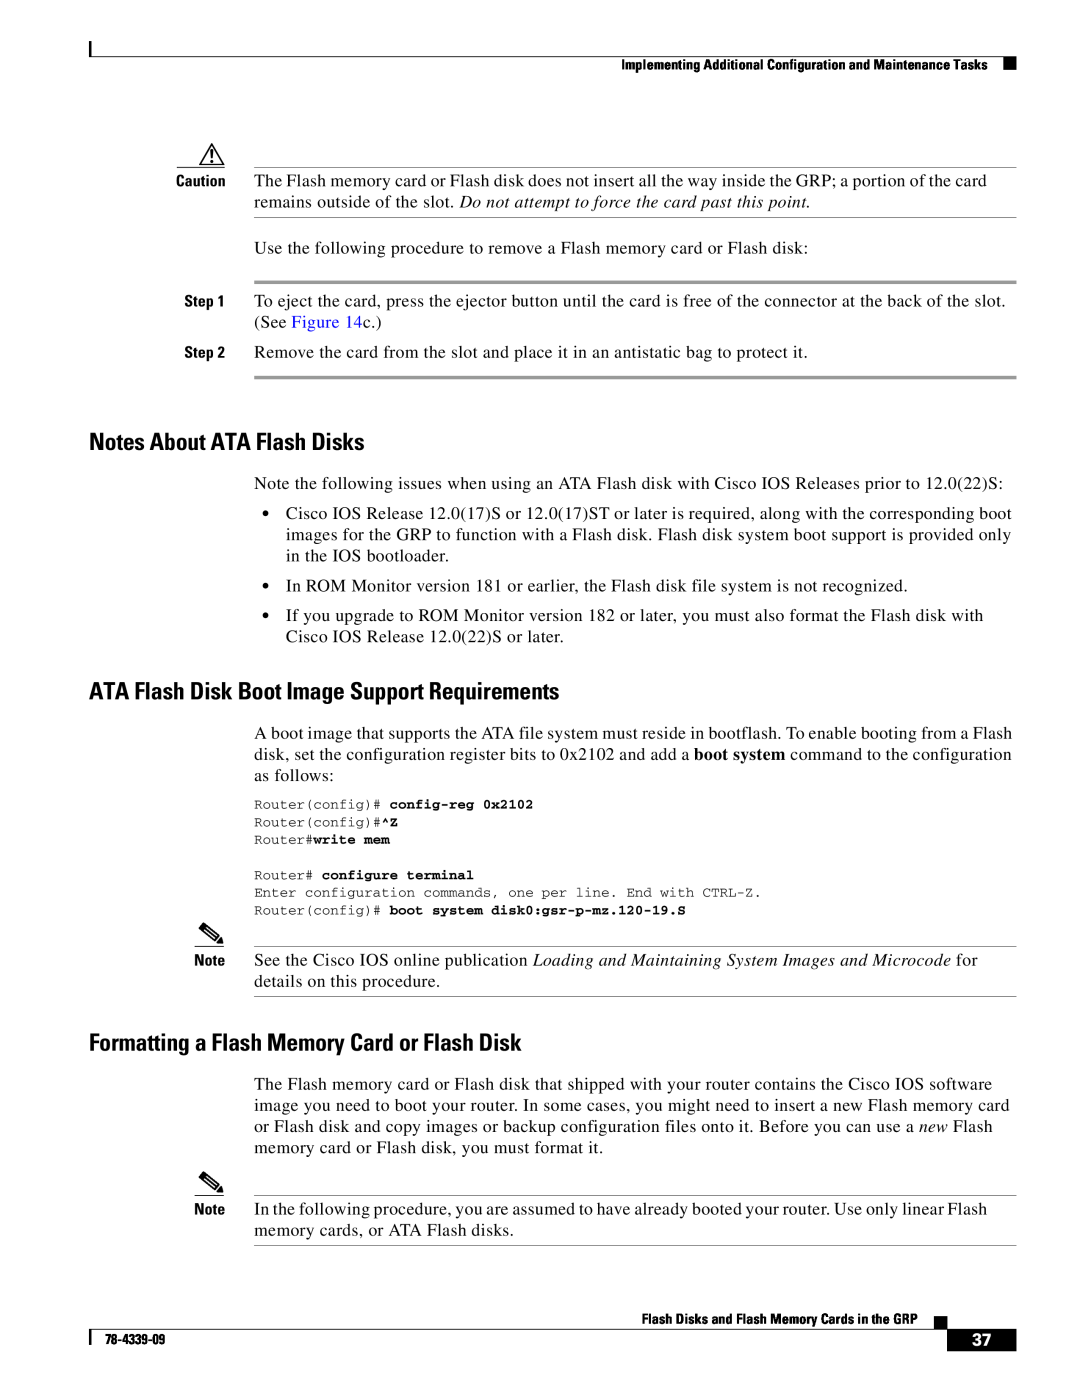 Cisco Systems GRP Notes About ATA Flash Disks, ATA Flash Disk Boot Image Support Requirements, Routerconfig# config-reg 